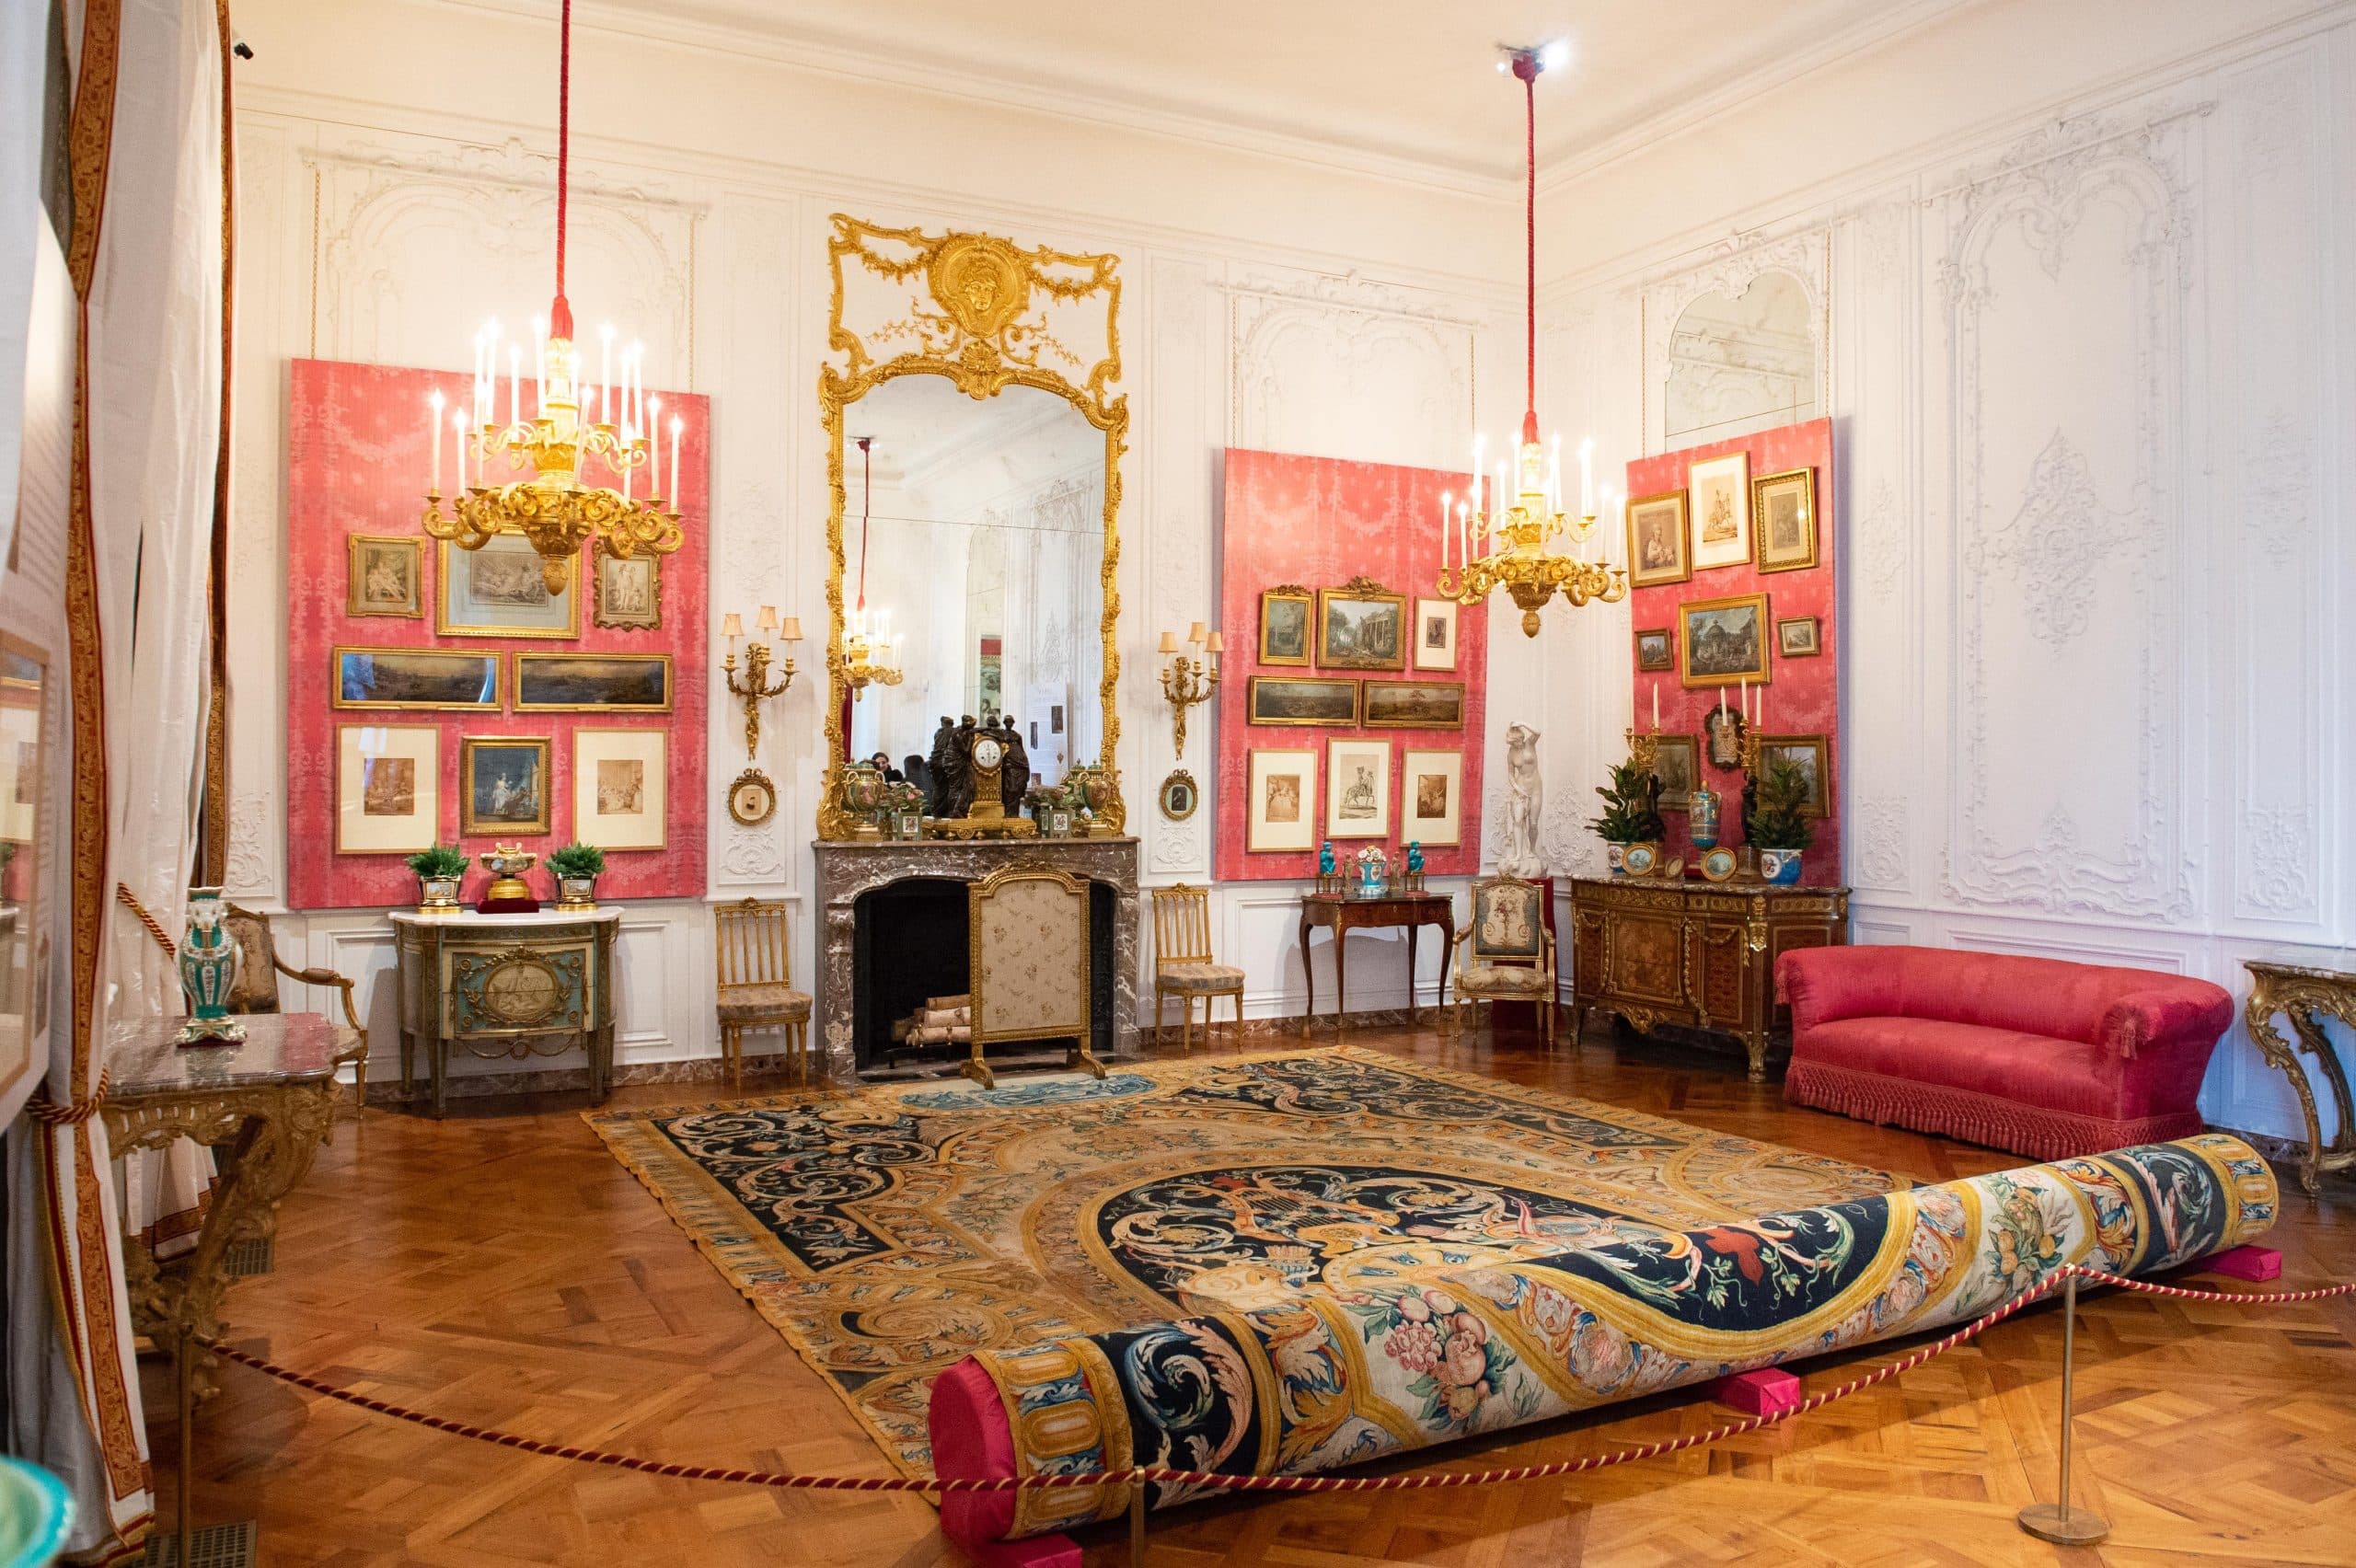 View of recreation of the Red Sitting Room at Waddesdon Manor featuring French decor part of the show "Alice's Wonderlands" about Alice de Rothschild England